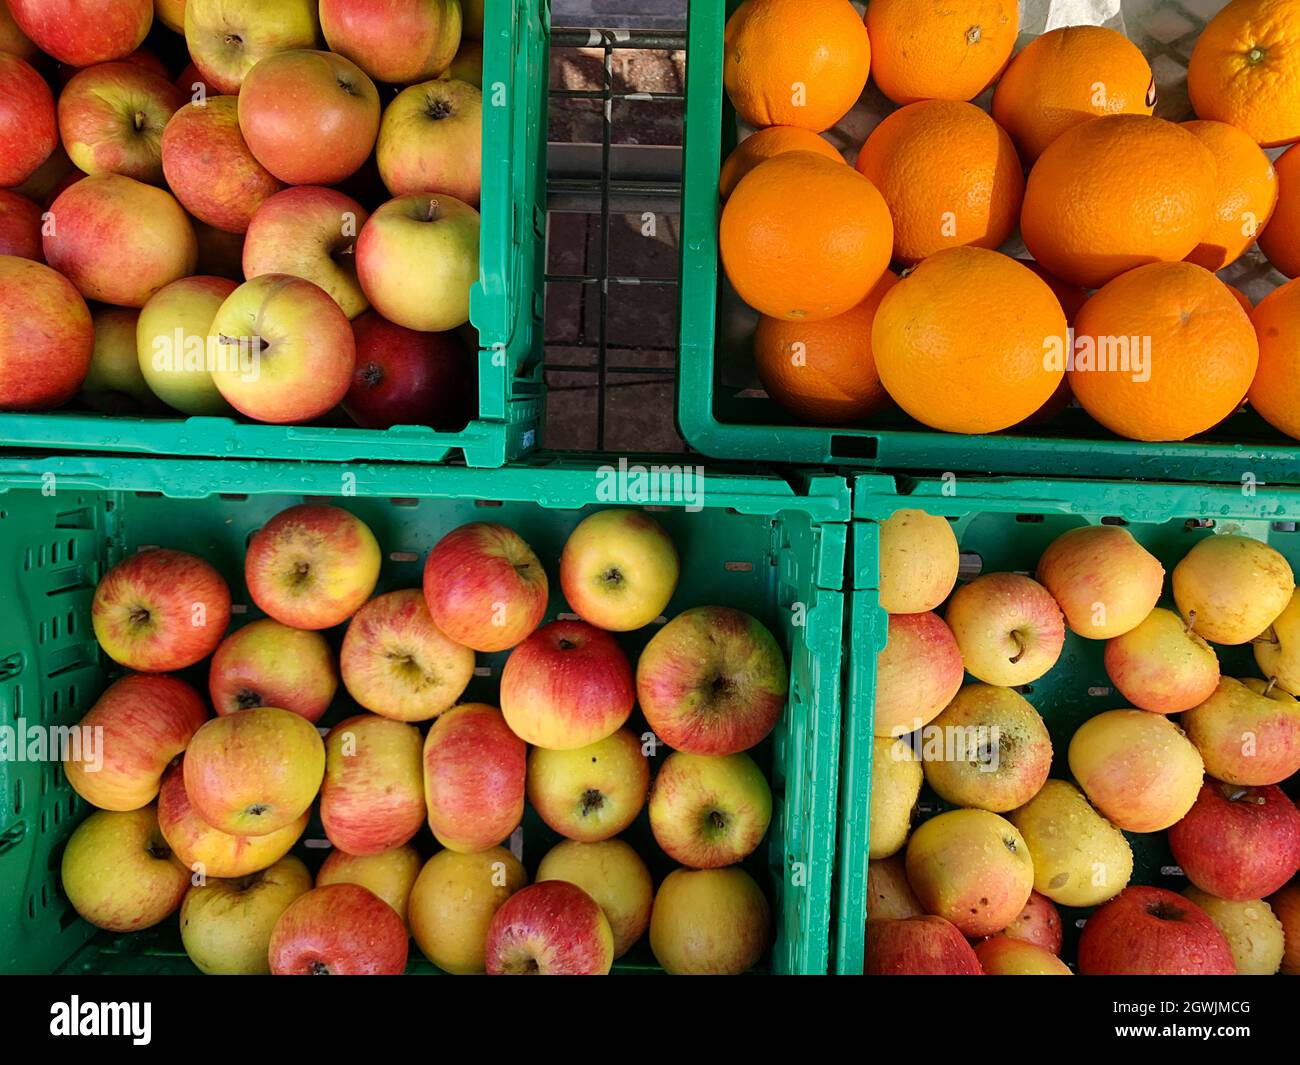 High Angle View Of Apples And Oranges For Sale In Weekly Market Stock Photo